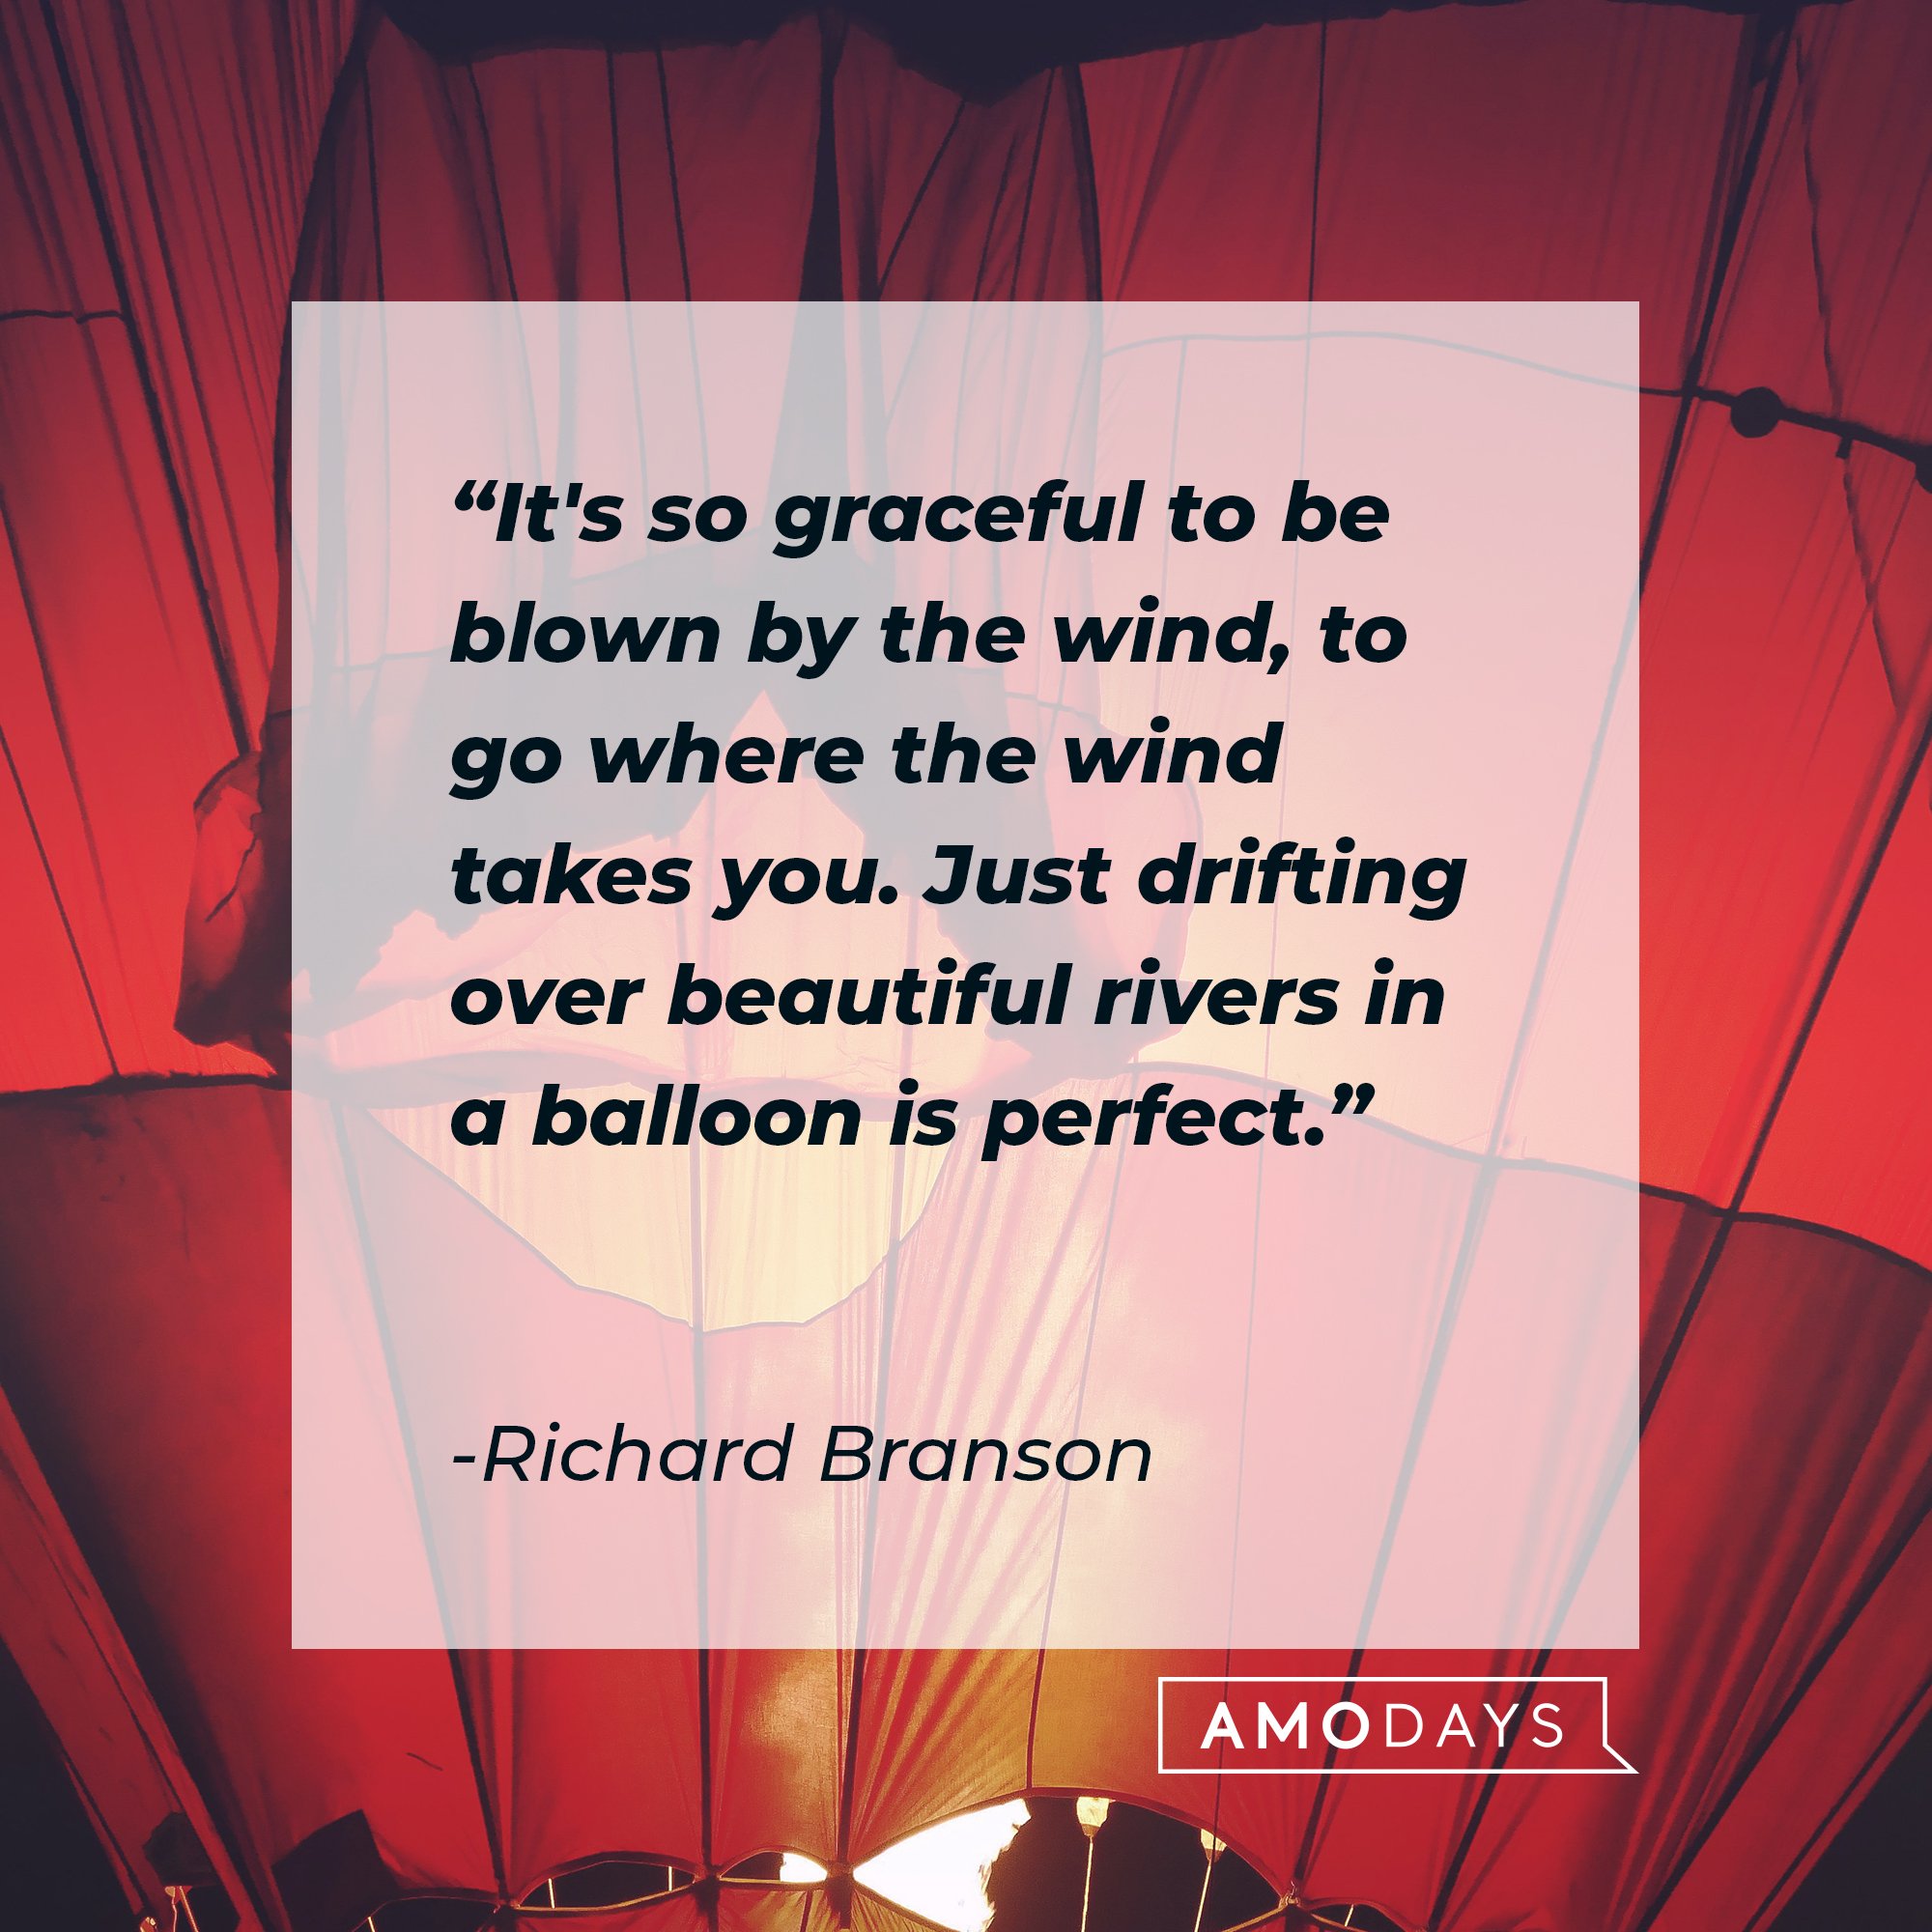 Richard Branson’s quote: "It's so graceful to be blown by the wind, to go where the wind takes you. Just drifting over beautiful rivers in a balloon is perfect." | Image: AmoDays 